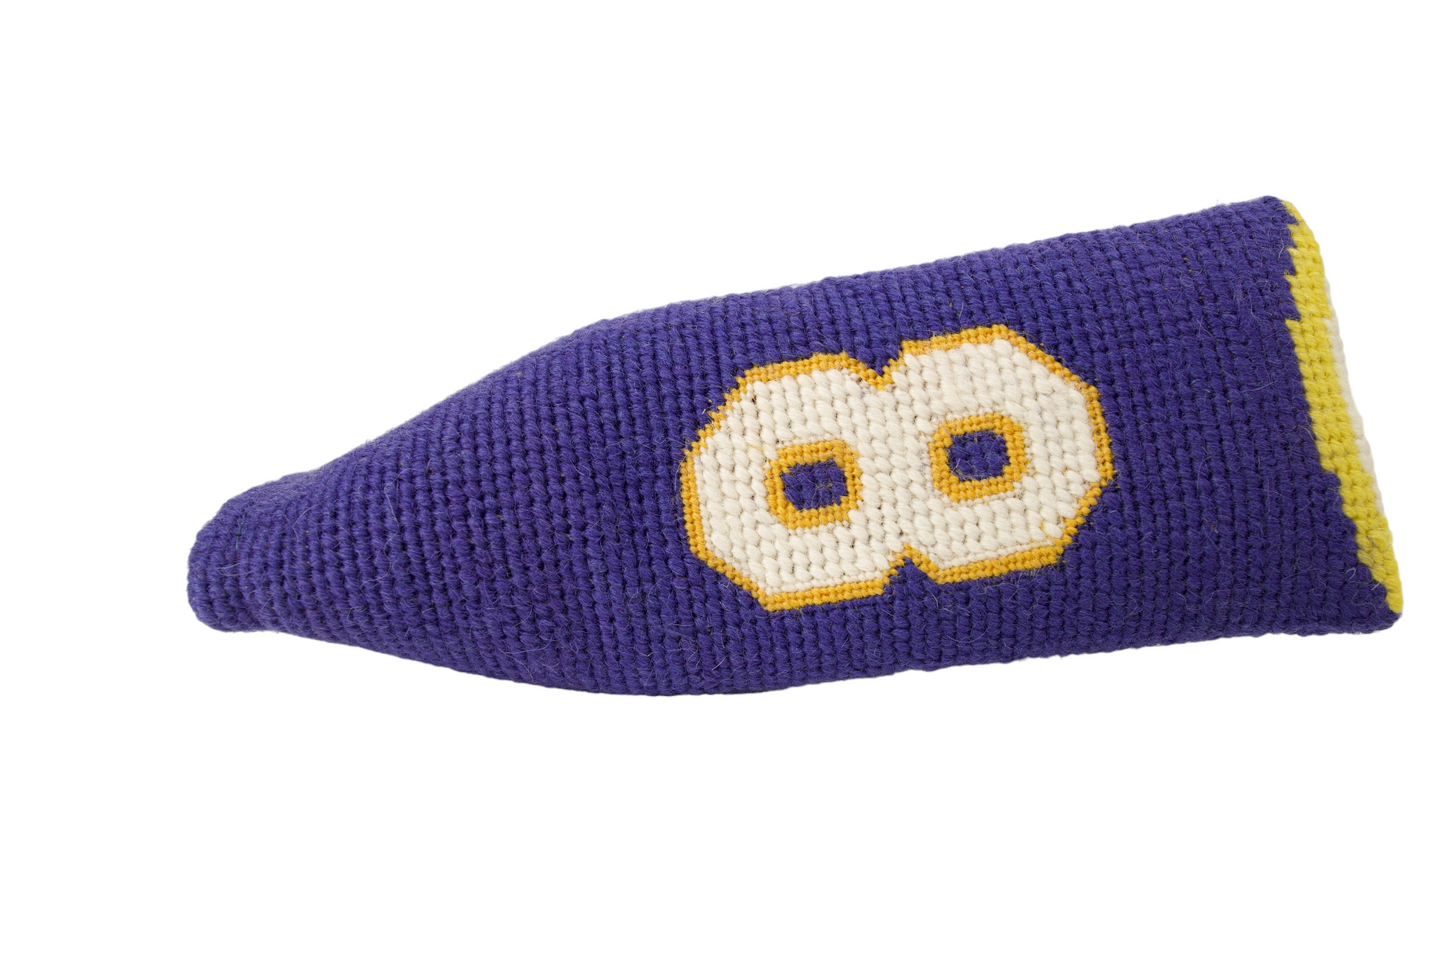 Mamba Mentality Blade Putter Headcover